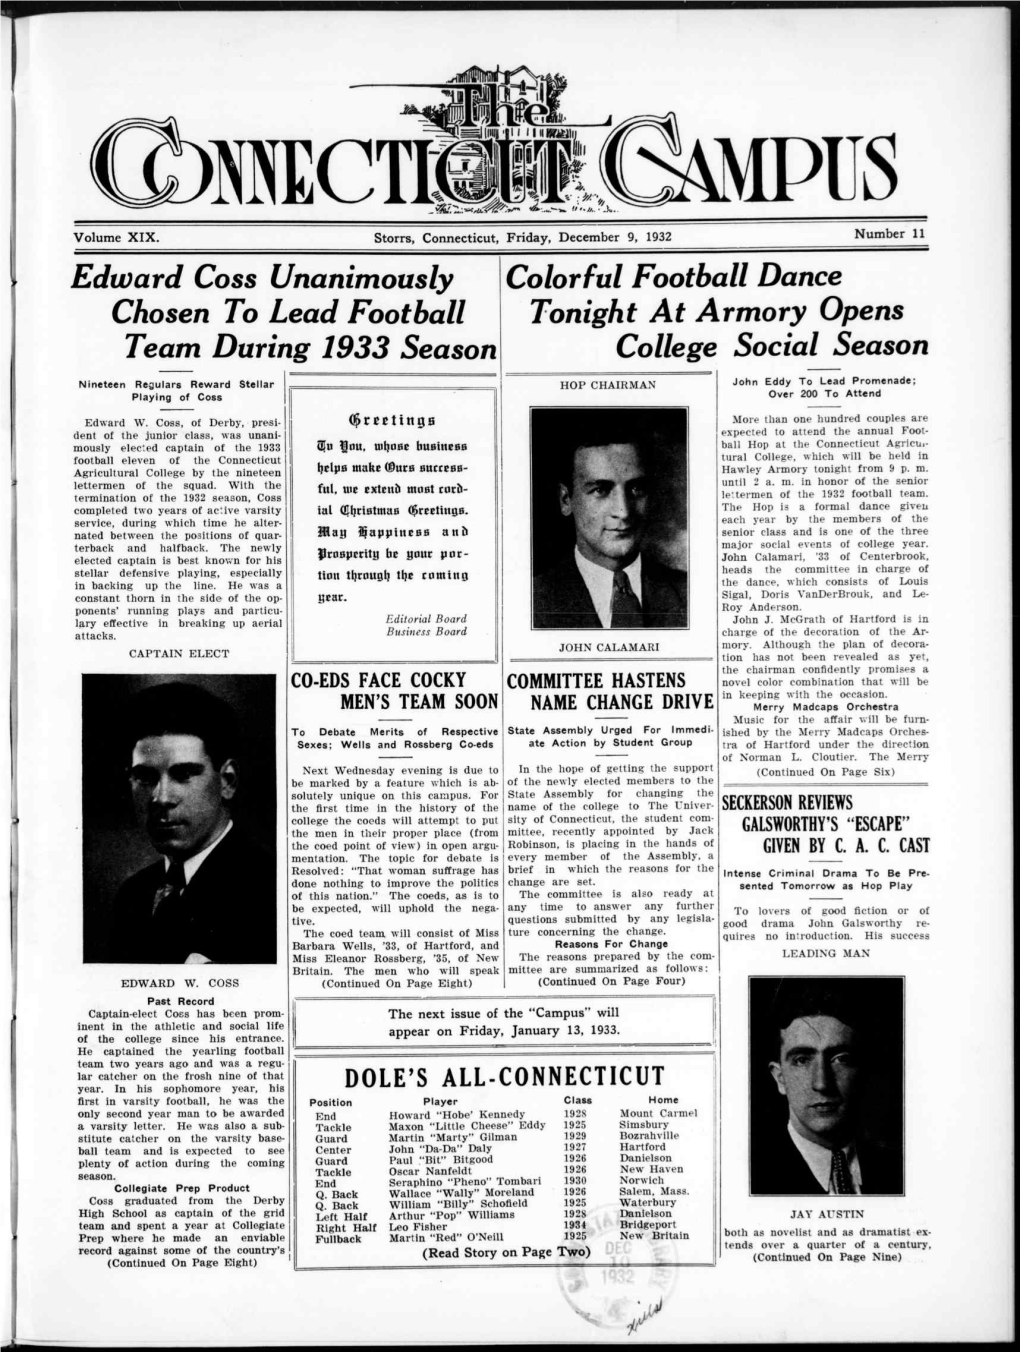 Edward Coss Unanimously Chosen to Lead Football Team During 1933 Season Colorful Football Dance Tonight at Armory Opens College